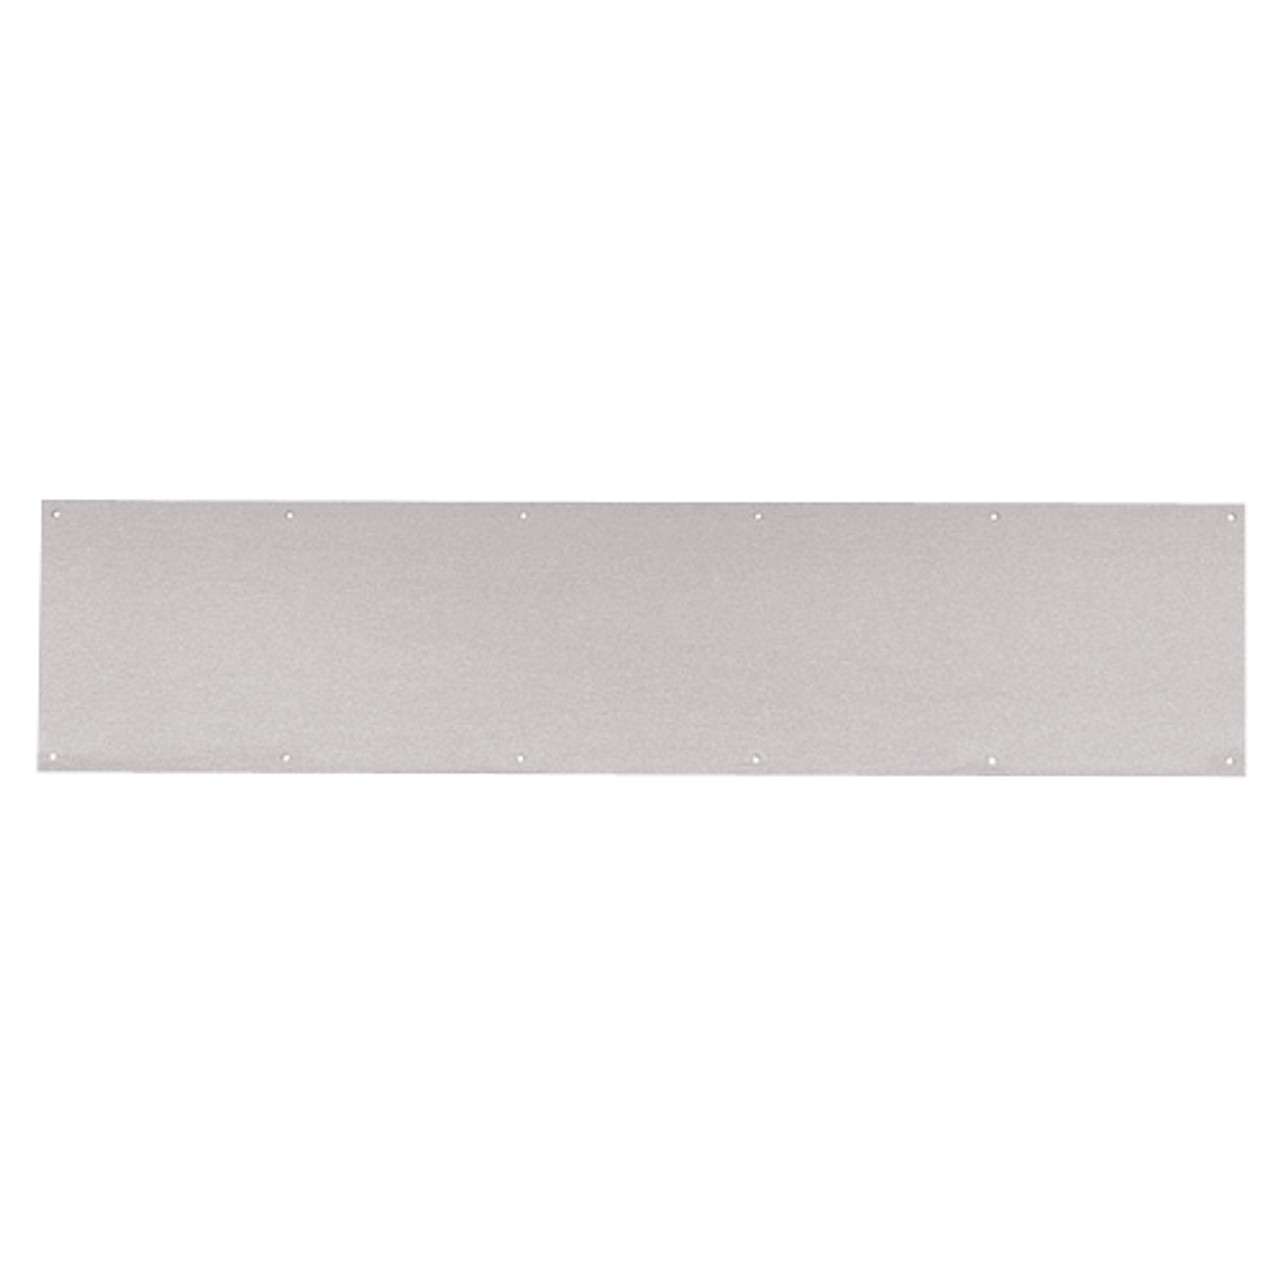 8400-US32D-6x40-B-CS Ives 8400 Series Protection Plate in Satin Stainless Steel